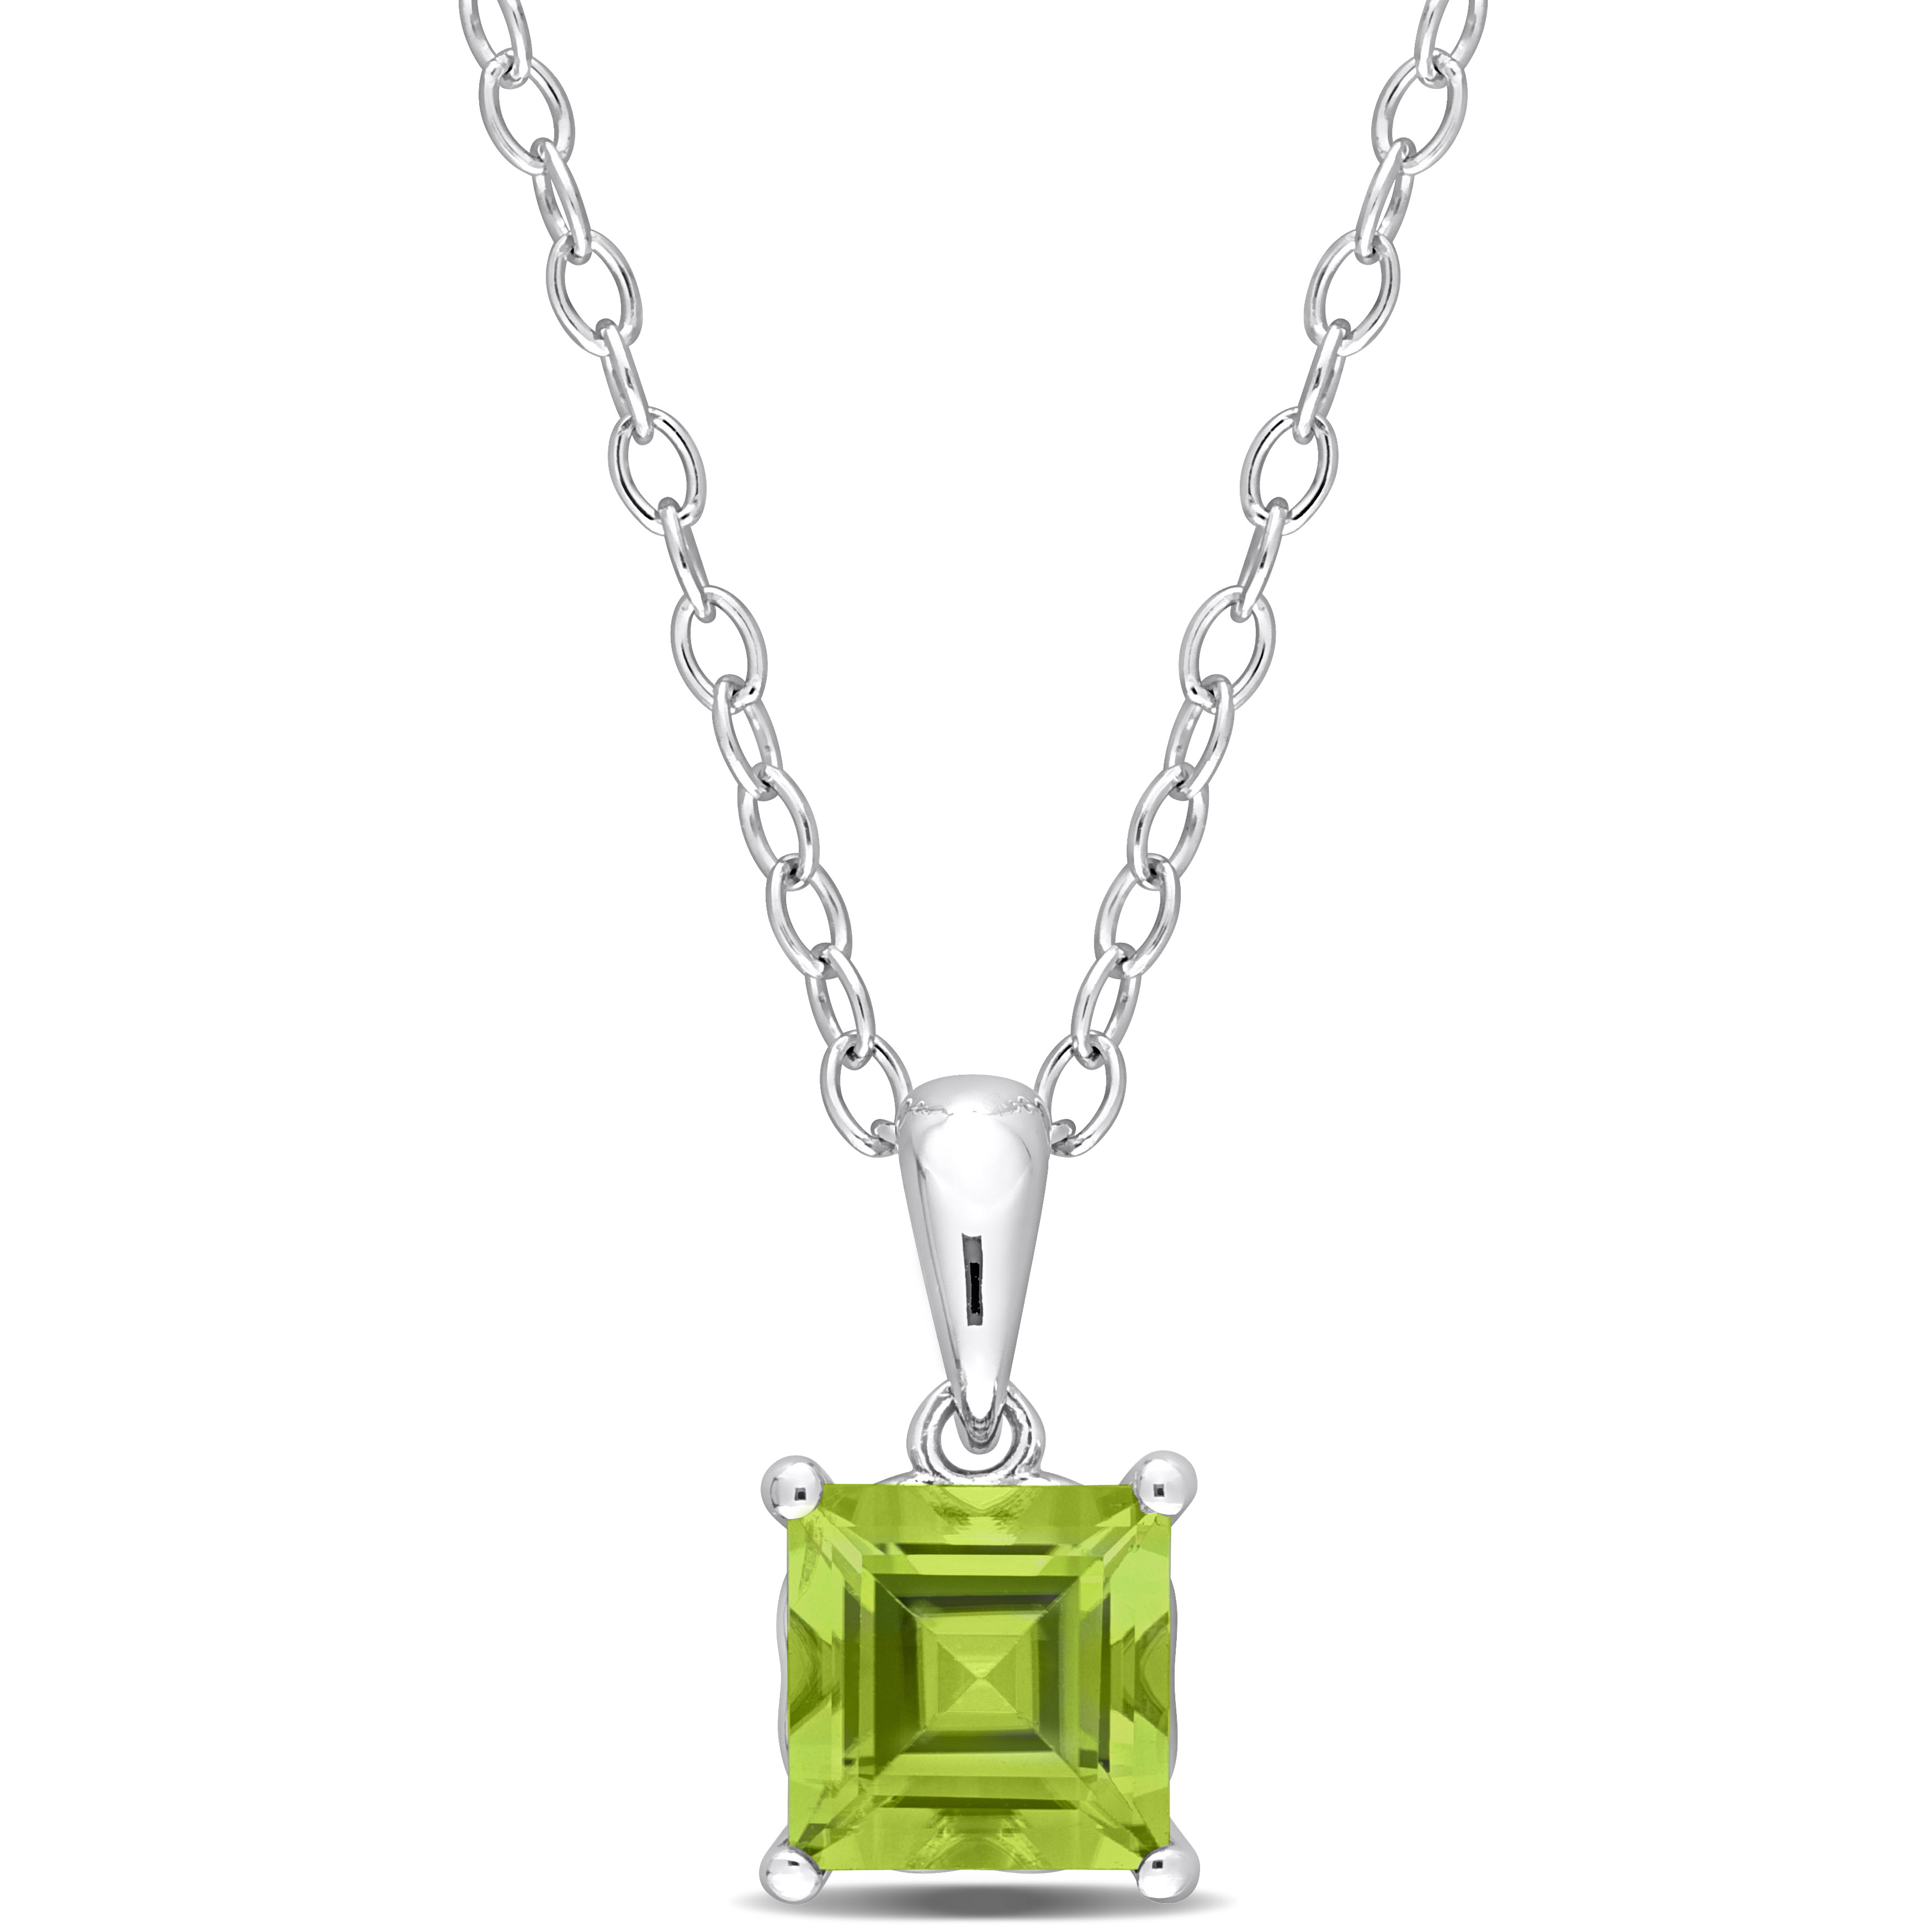 1 1/5 CT TGW Princess Cut Peridot Solitaire Heart Design Pendant with Chain in Sterling Silver - 18 in.